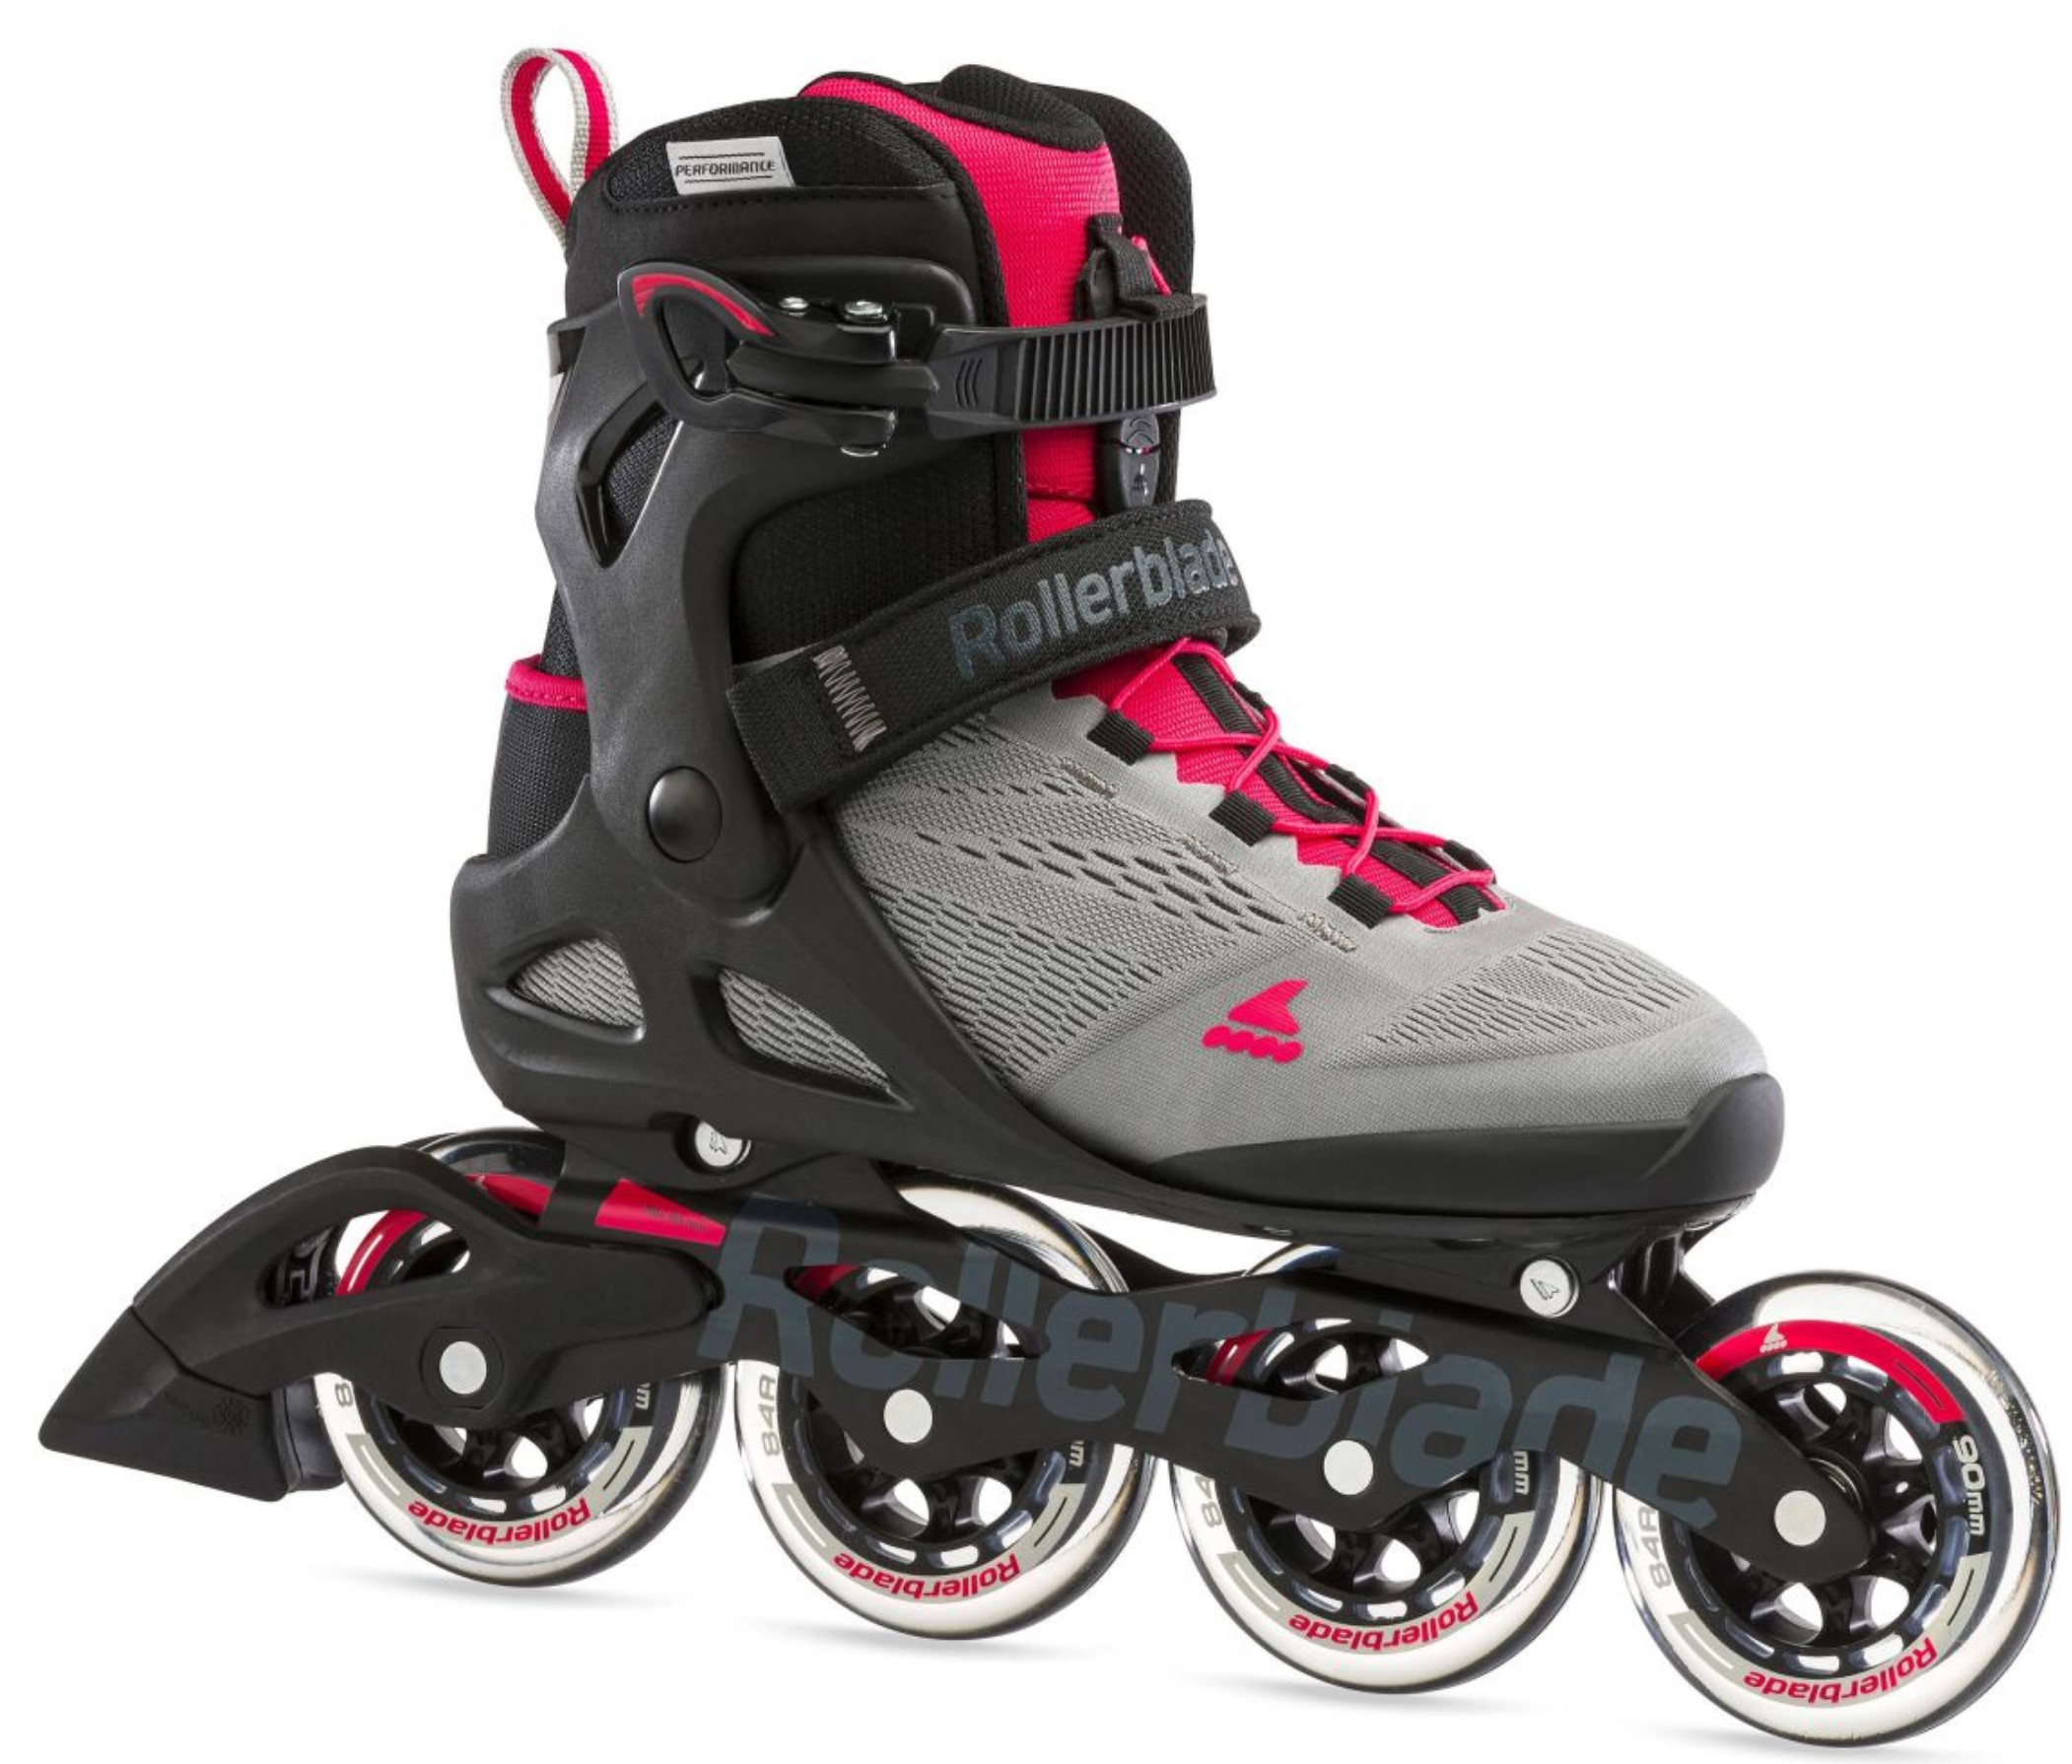 Rollerblade Macroblade 90 W inline skate for recreational use in grey and pink